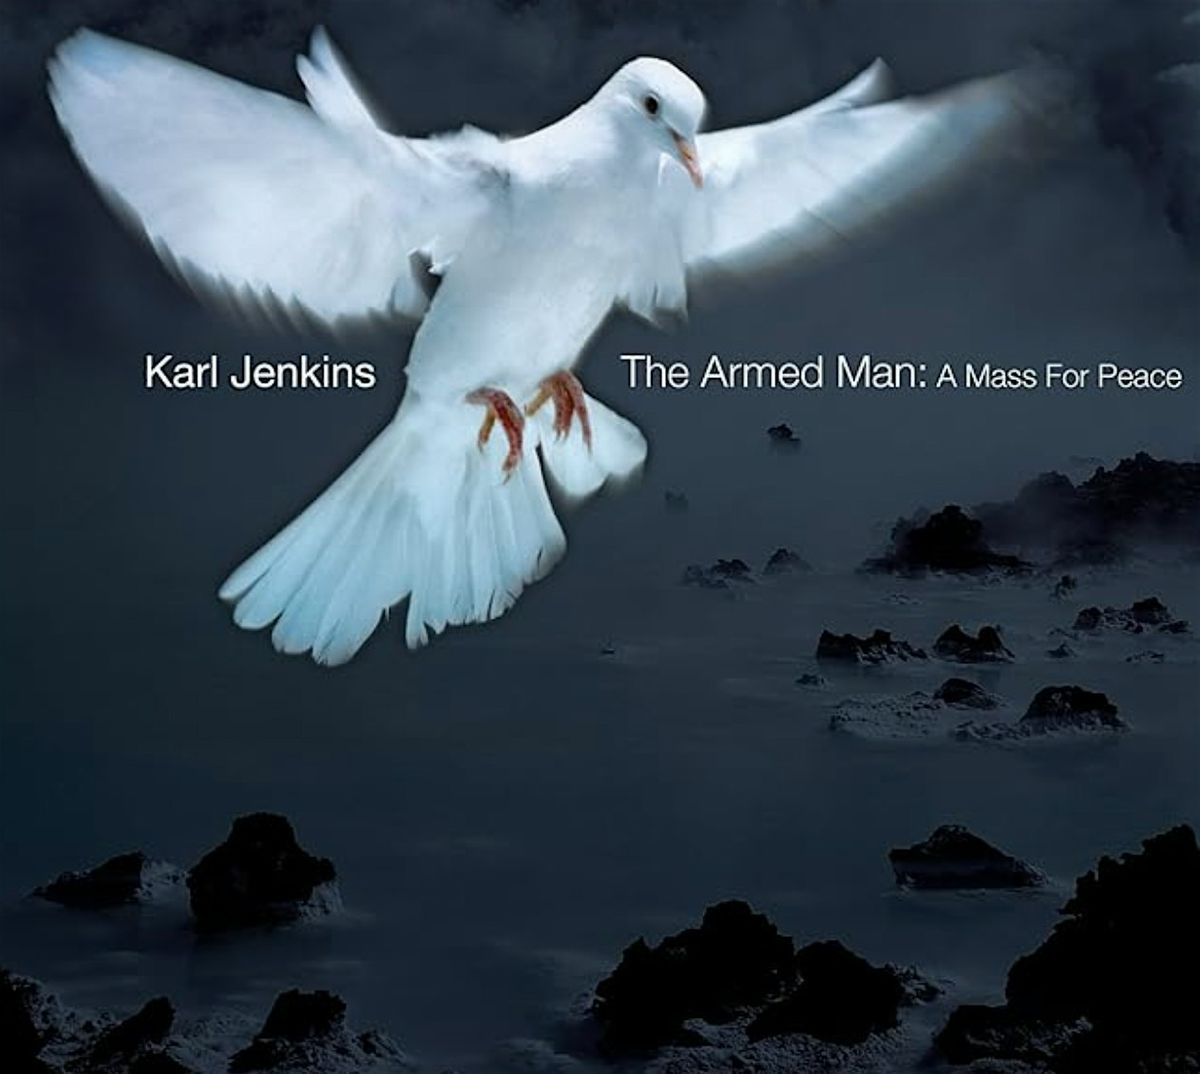 The Armed Man by Karl Jenkins